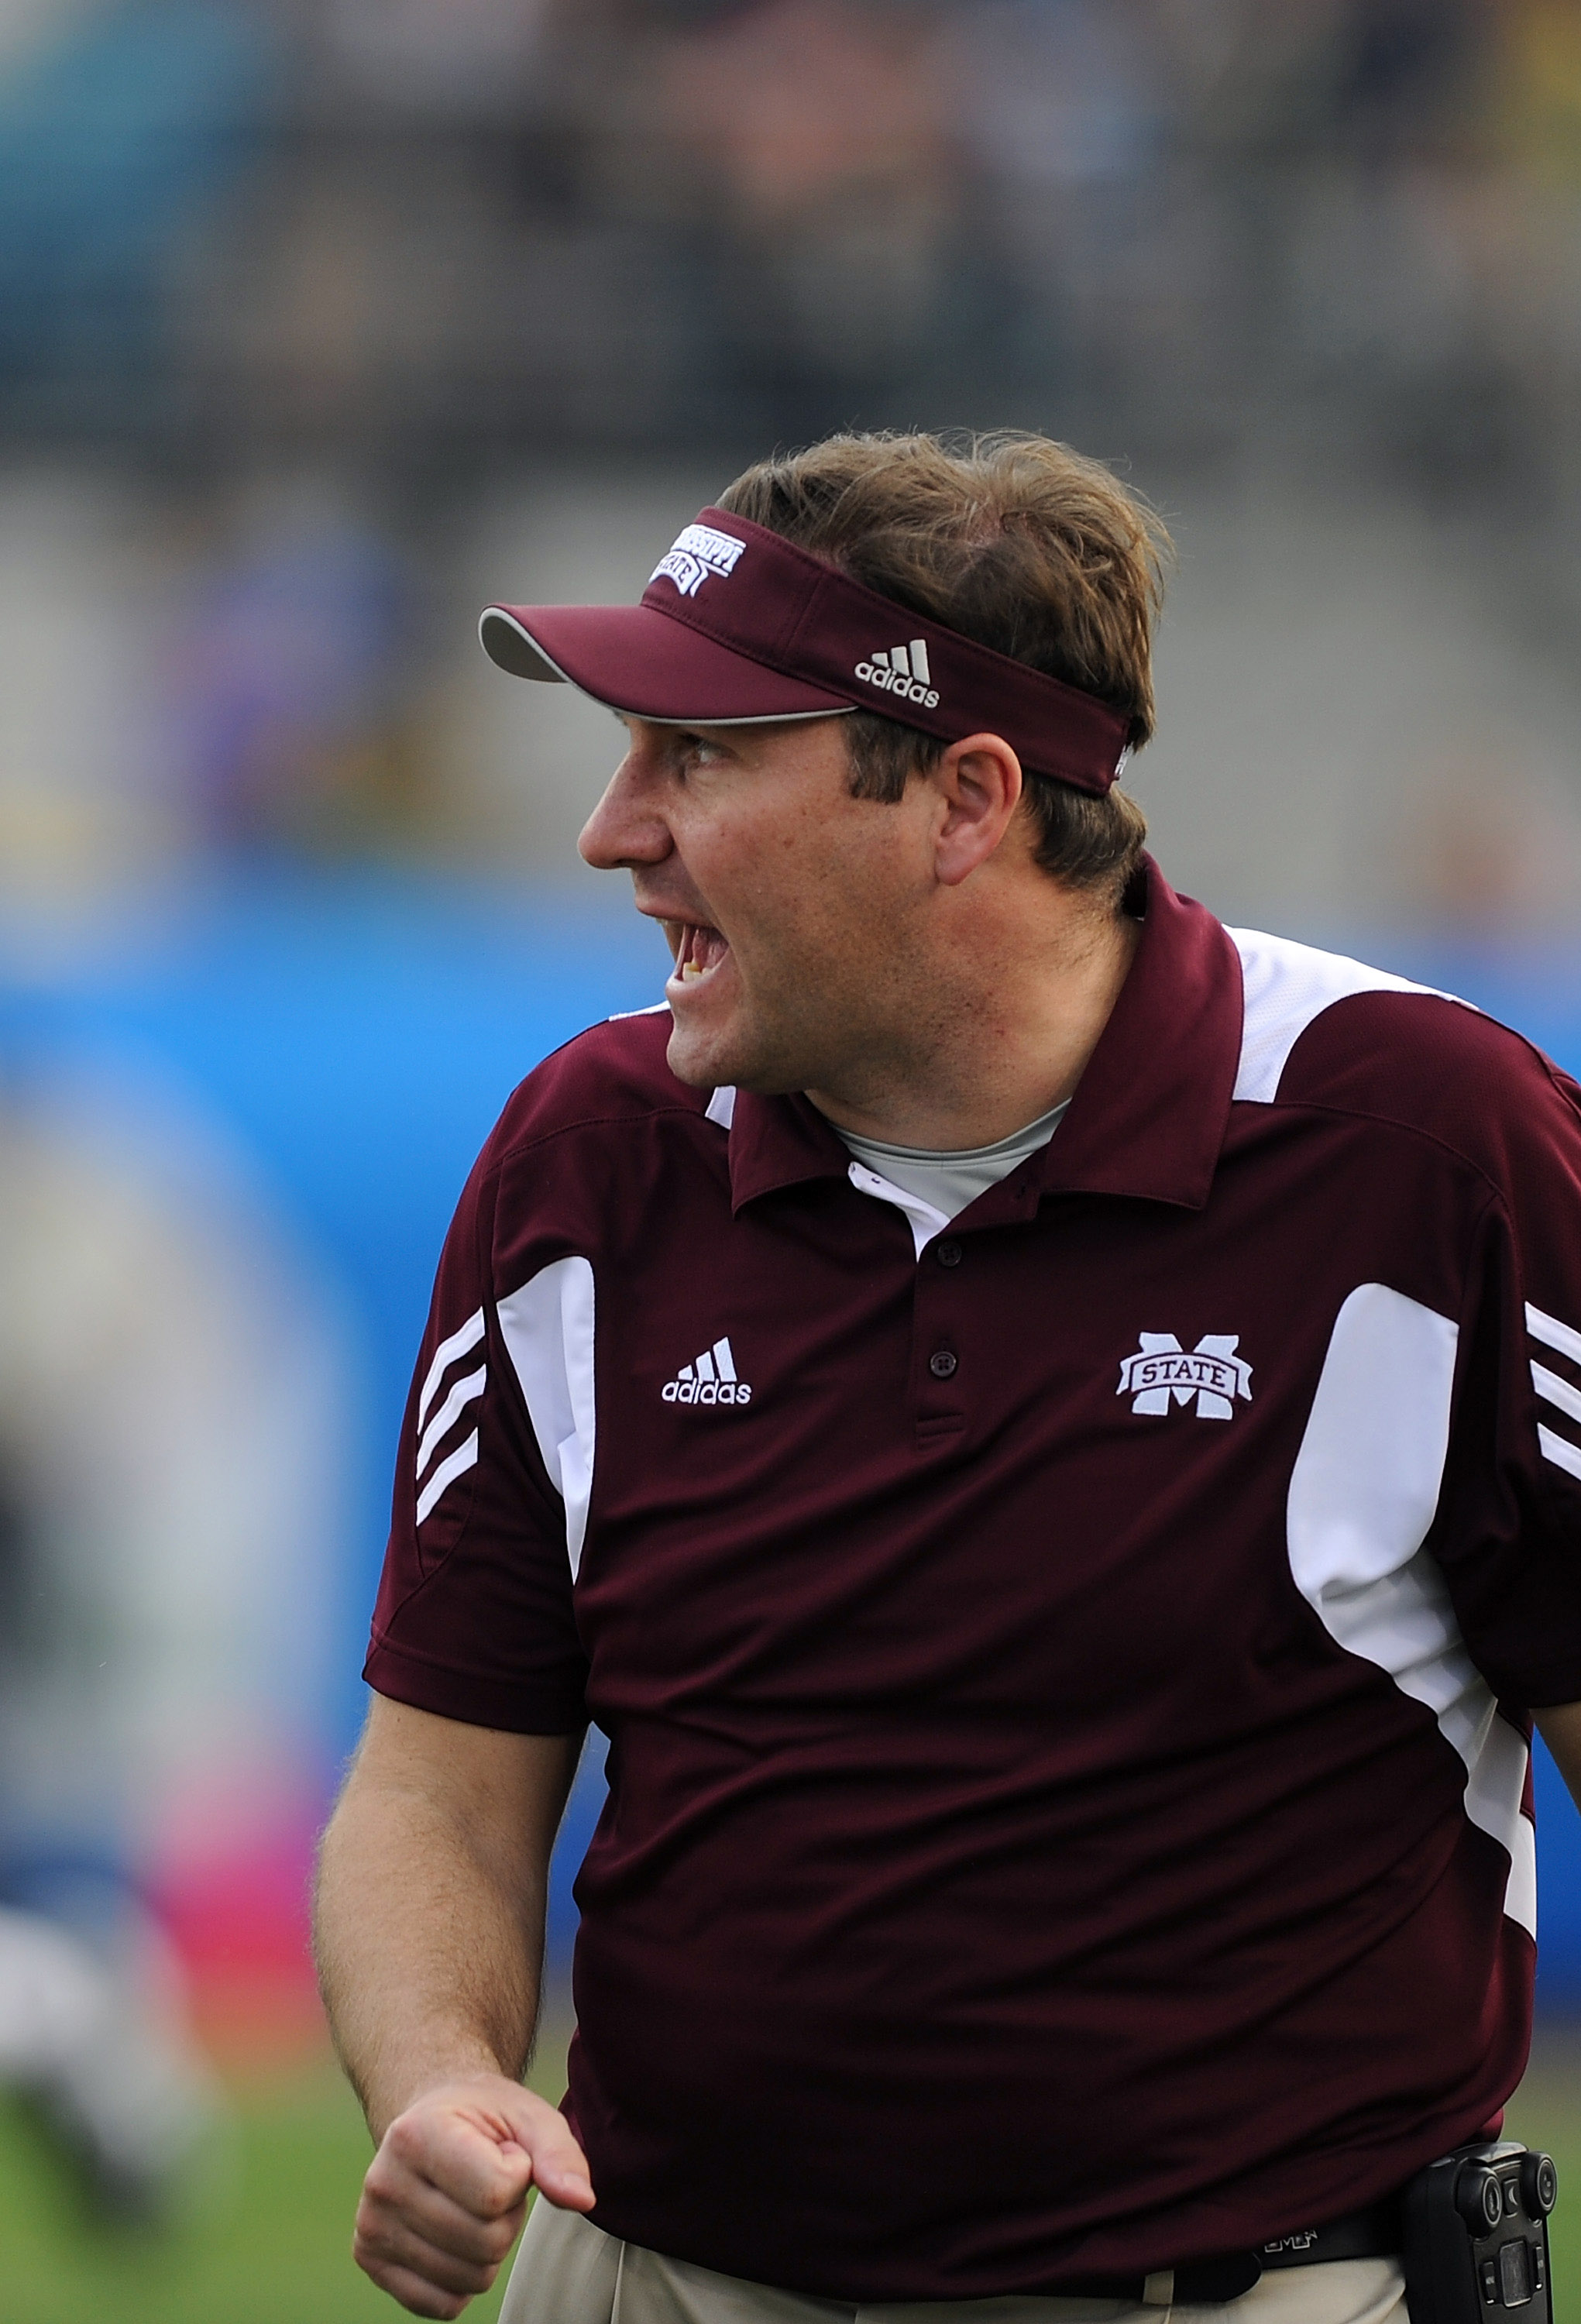 JACKSONVILLE, FL - JANUARY 01:  Head Coach Dan Mullen of the Mississippi State Bulldogs during the Gator Bowl at EverBank Field on January 1, 2011 in Jacksonville, Florida  (Photo by Rick Dole/Getty Images)